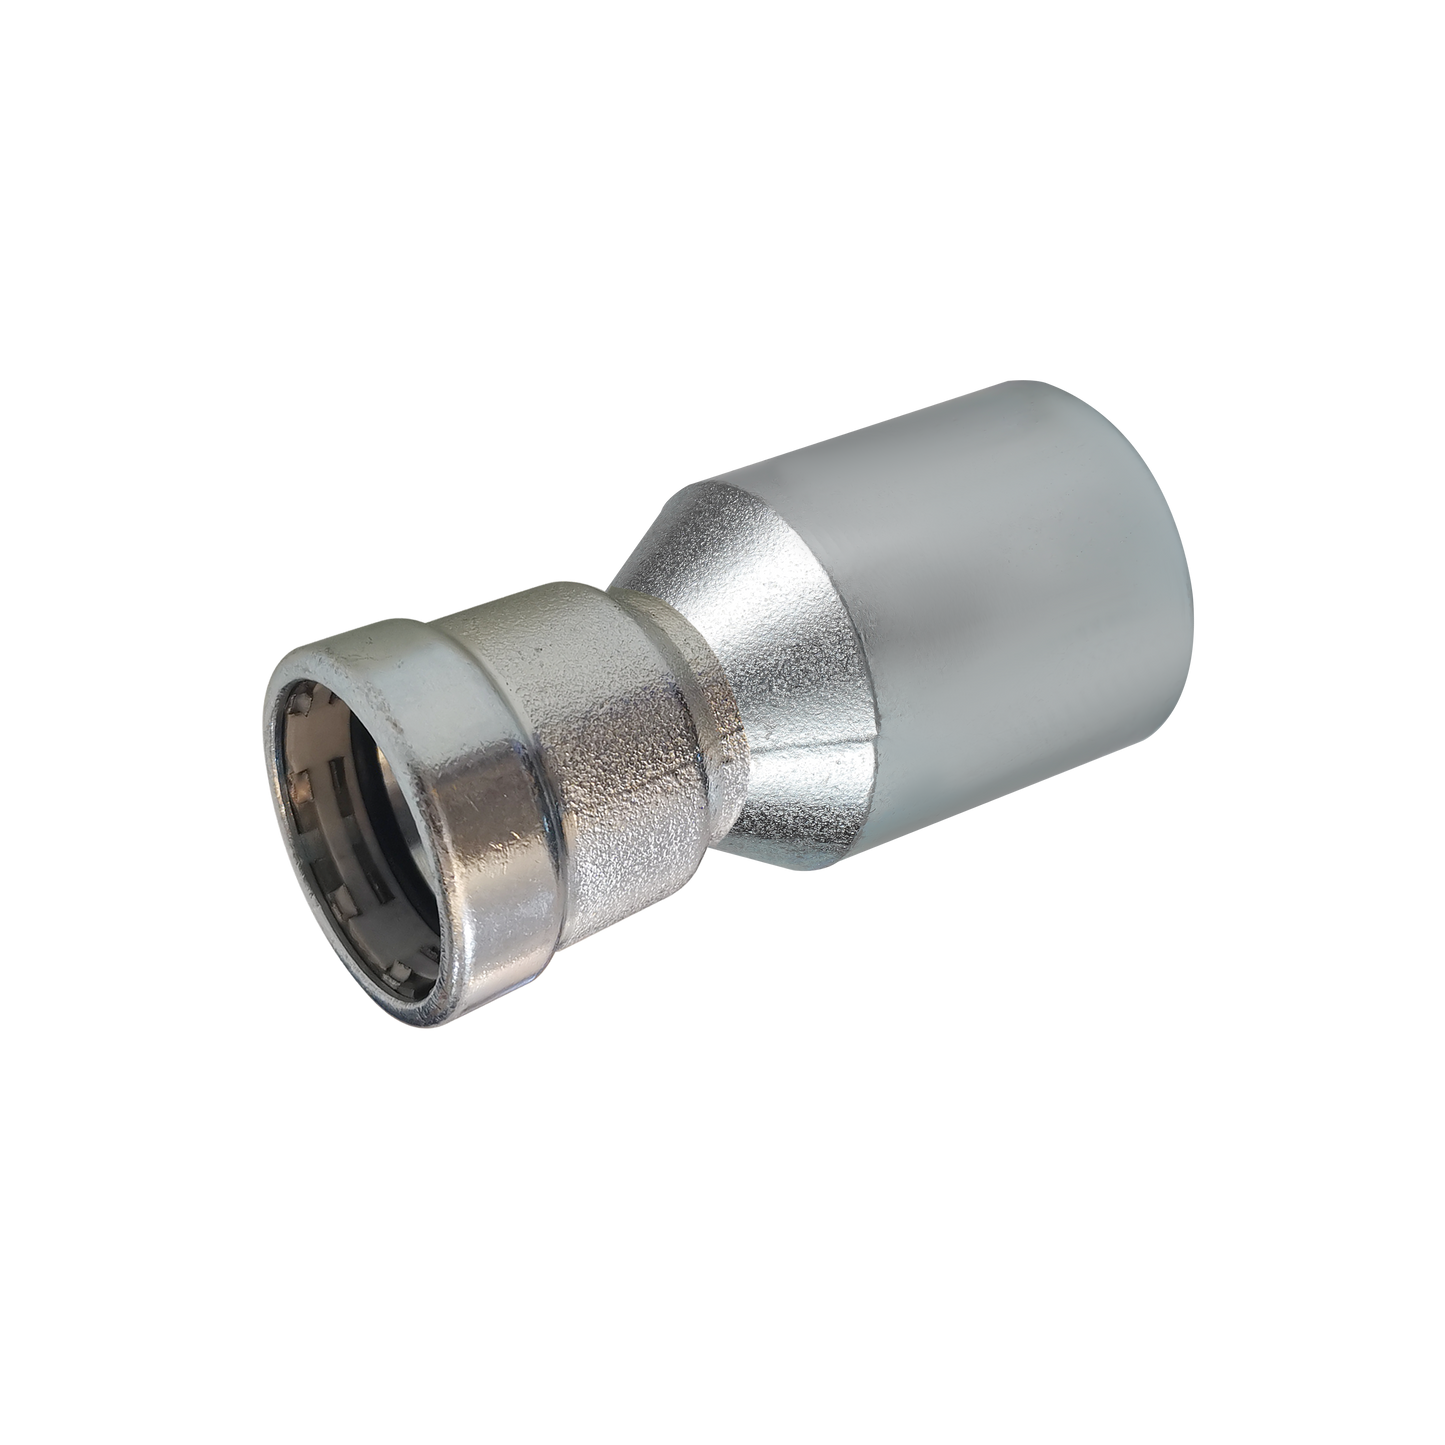 LC-Press Carbon steel Press fittings for thick-wall steel pipe, Reducer with Plain End, 1-1/2x1 inch FTGxP